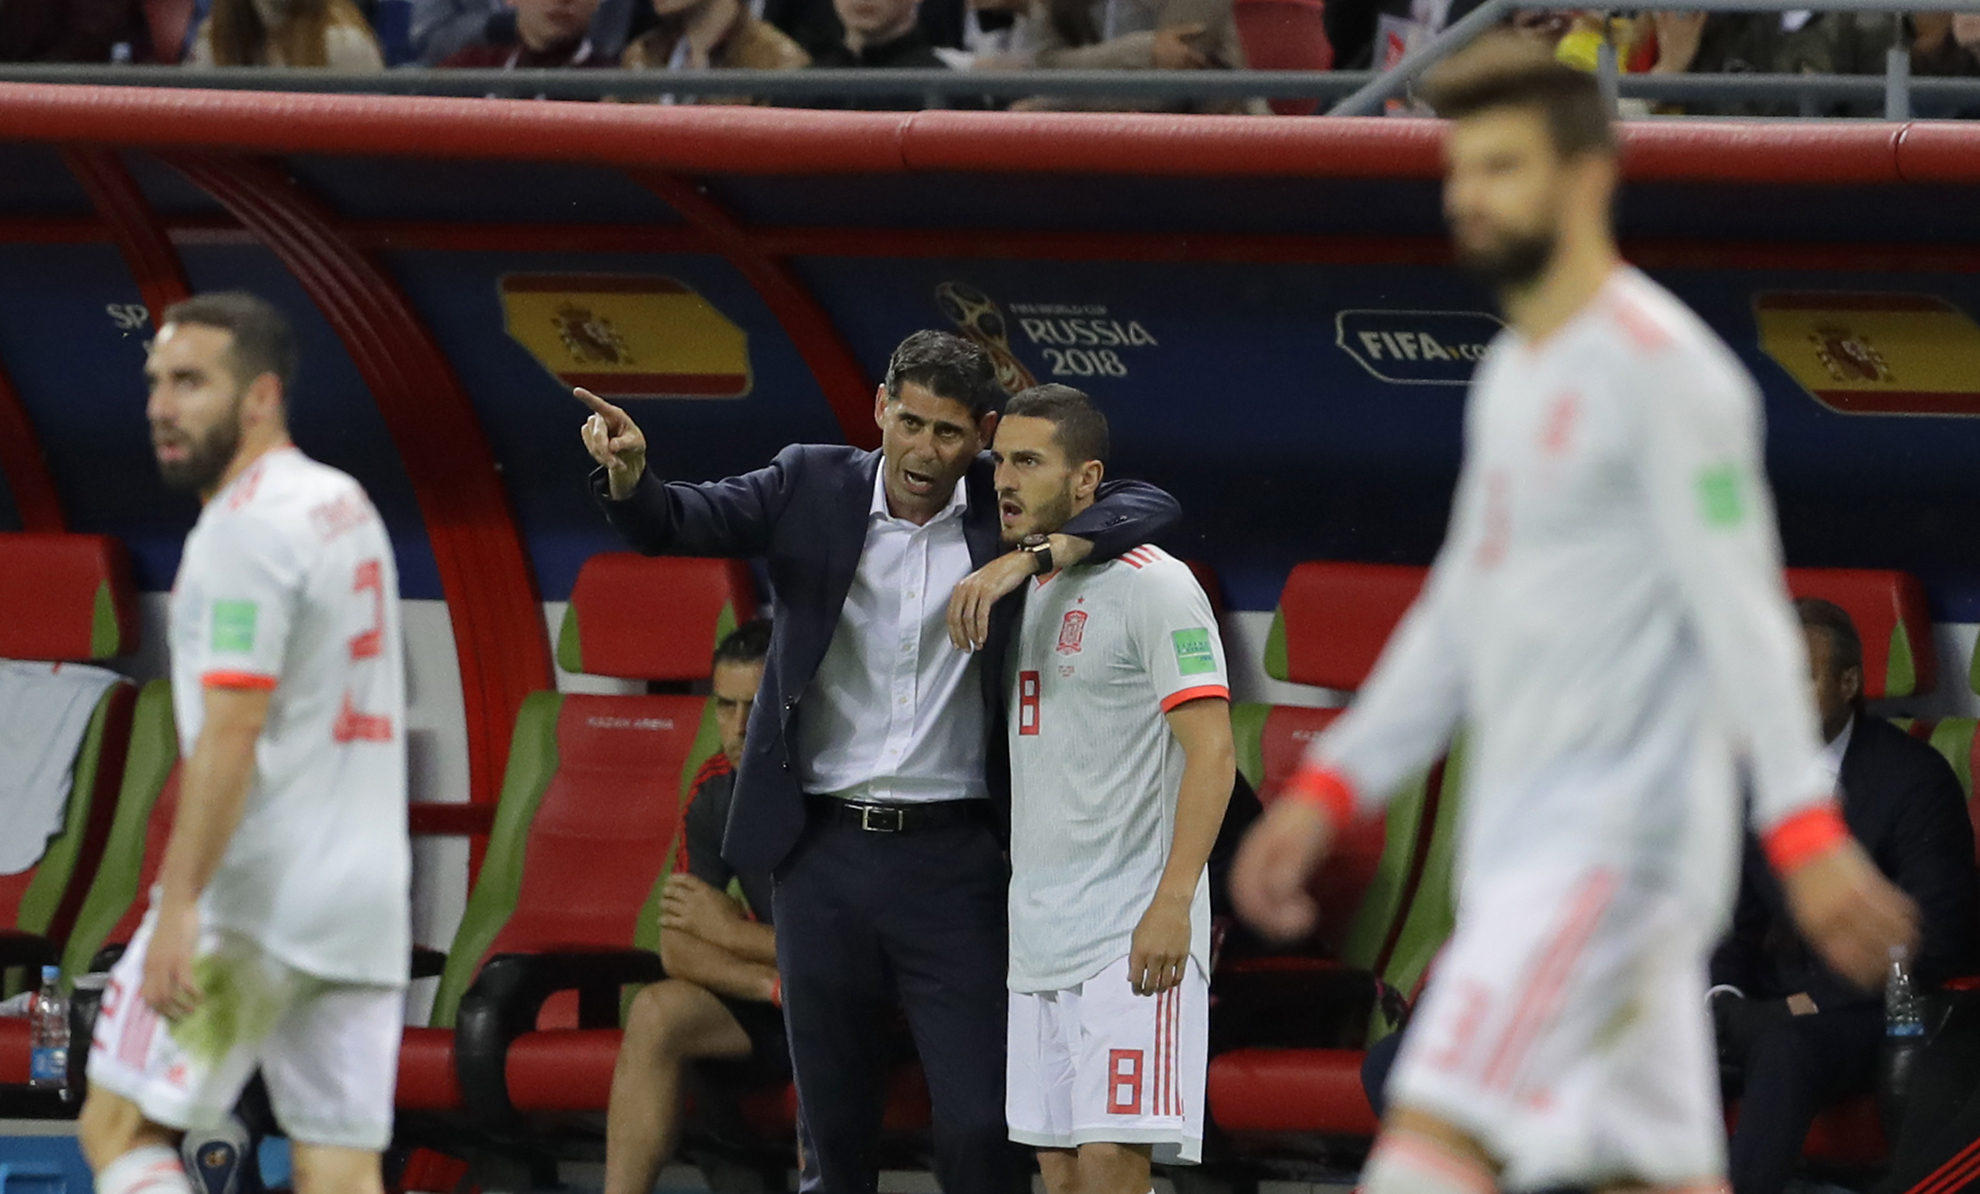 Caretaker Hierro leaving his mark on Spain at World Cup